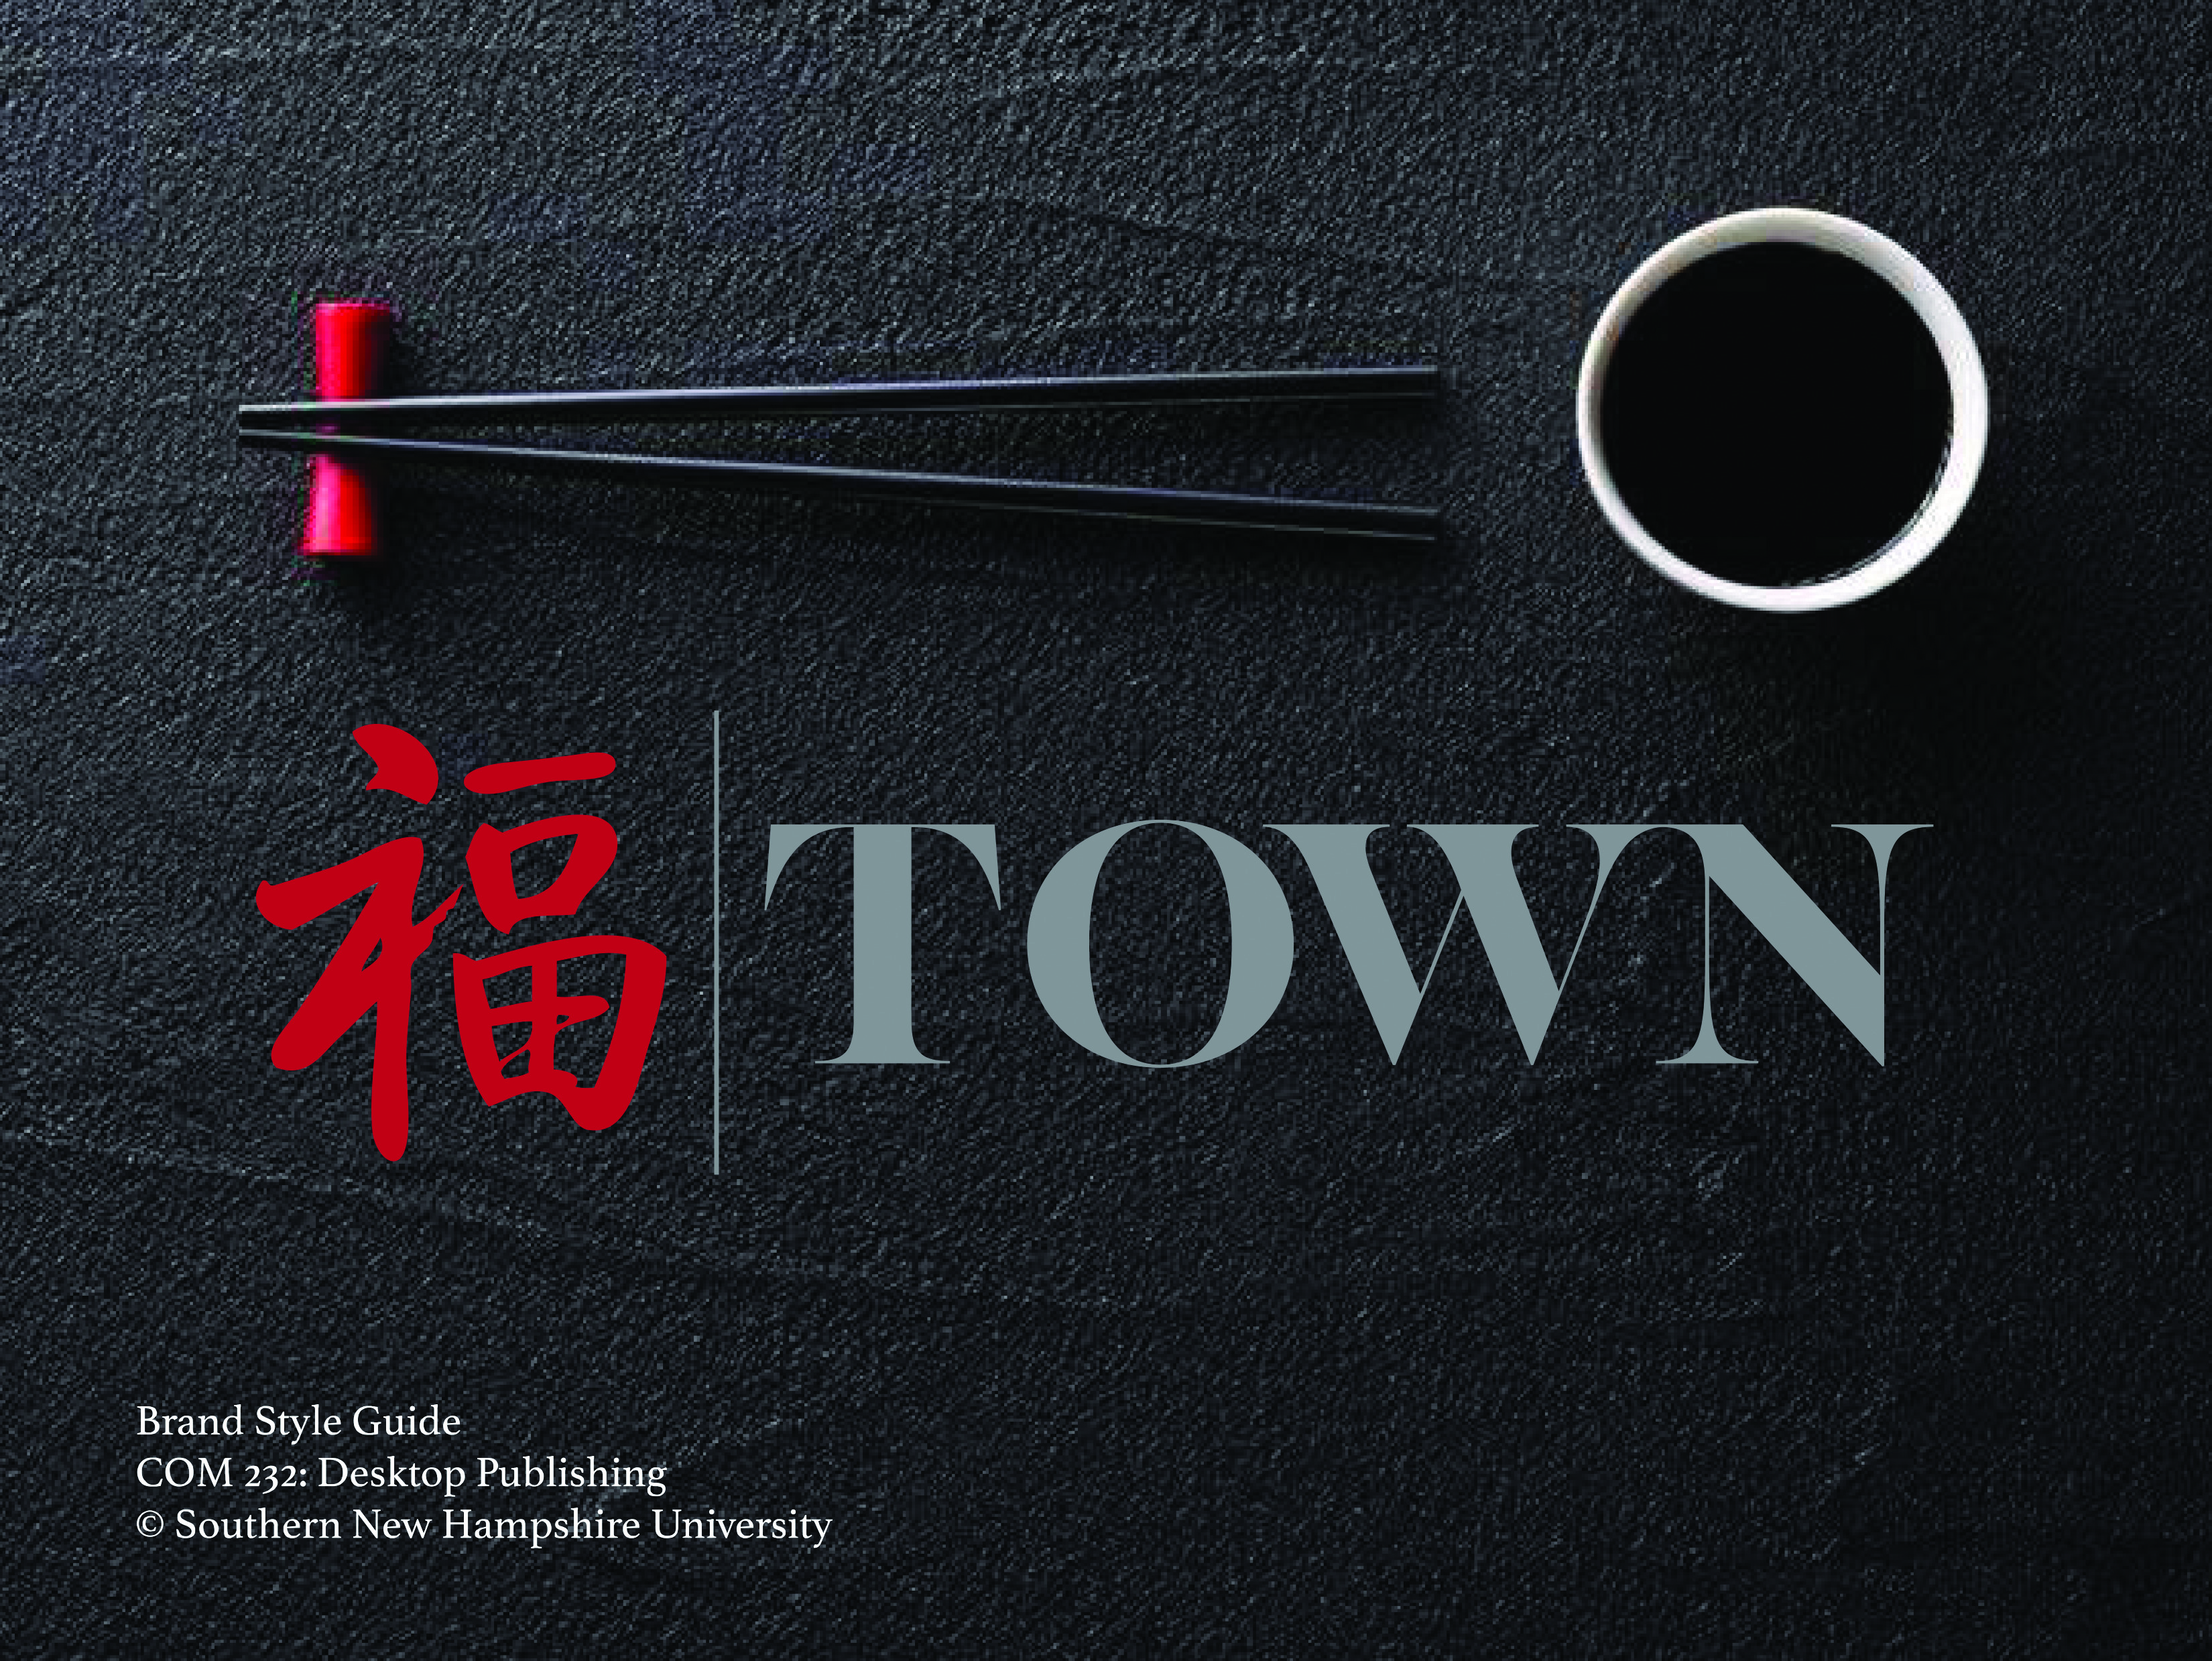 TownLogoWithChopsticks